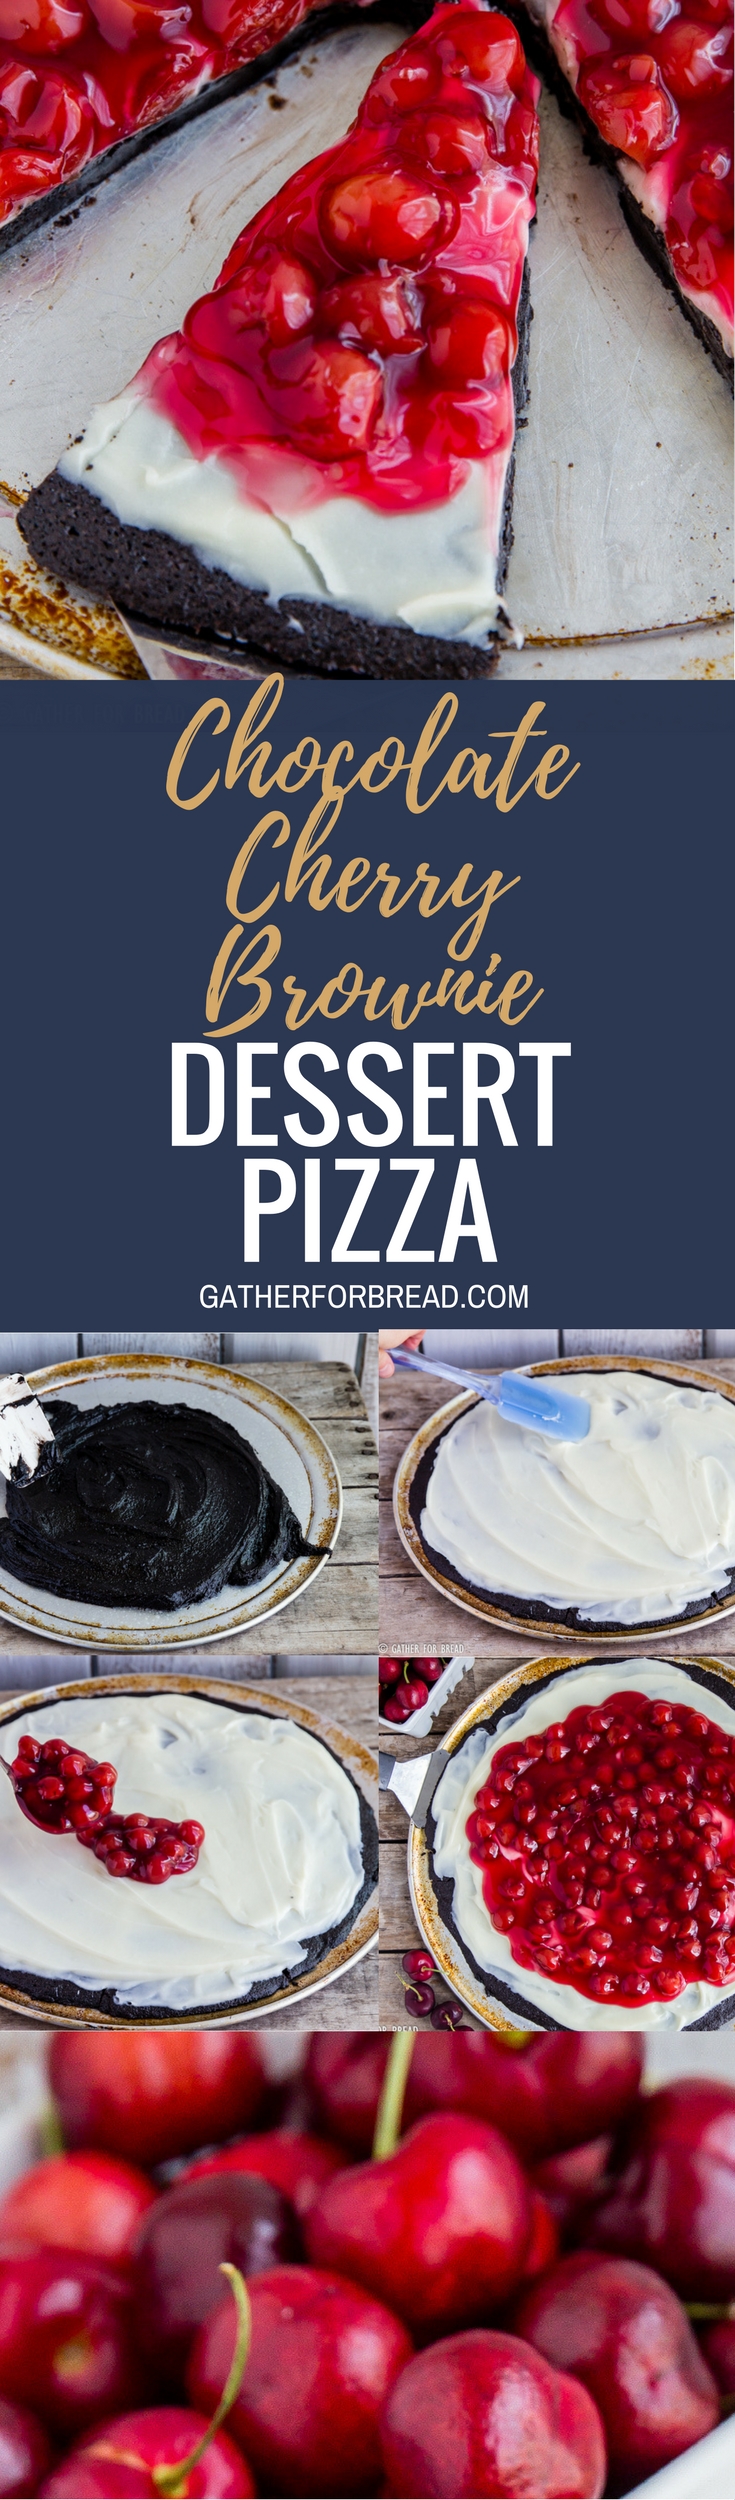 Chocolate Cherry Brownie Dessert Pizza - Cherry cheese dessert recipe with homemade brownies, fluffy cream cheese frosting and cherry pie filling for a sweet easy dessert.